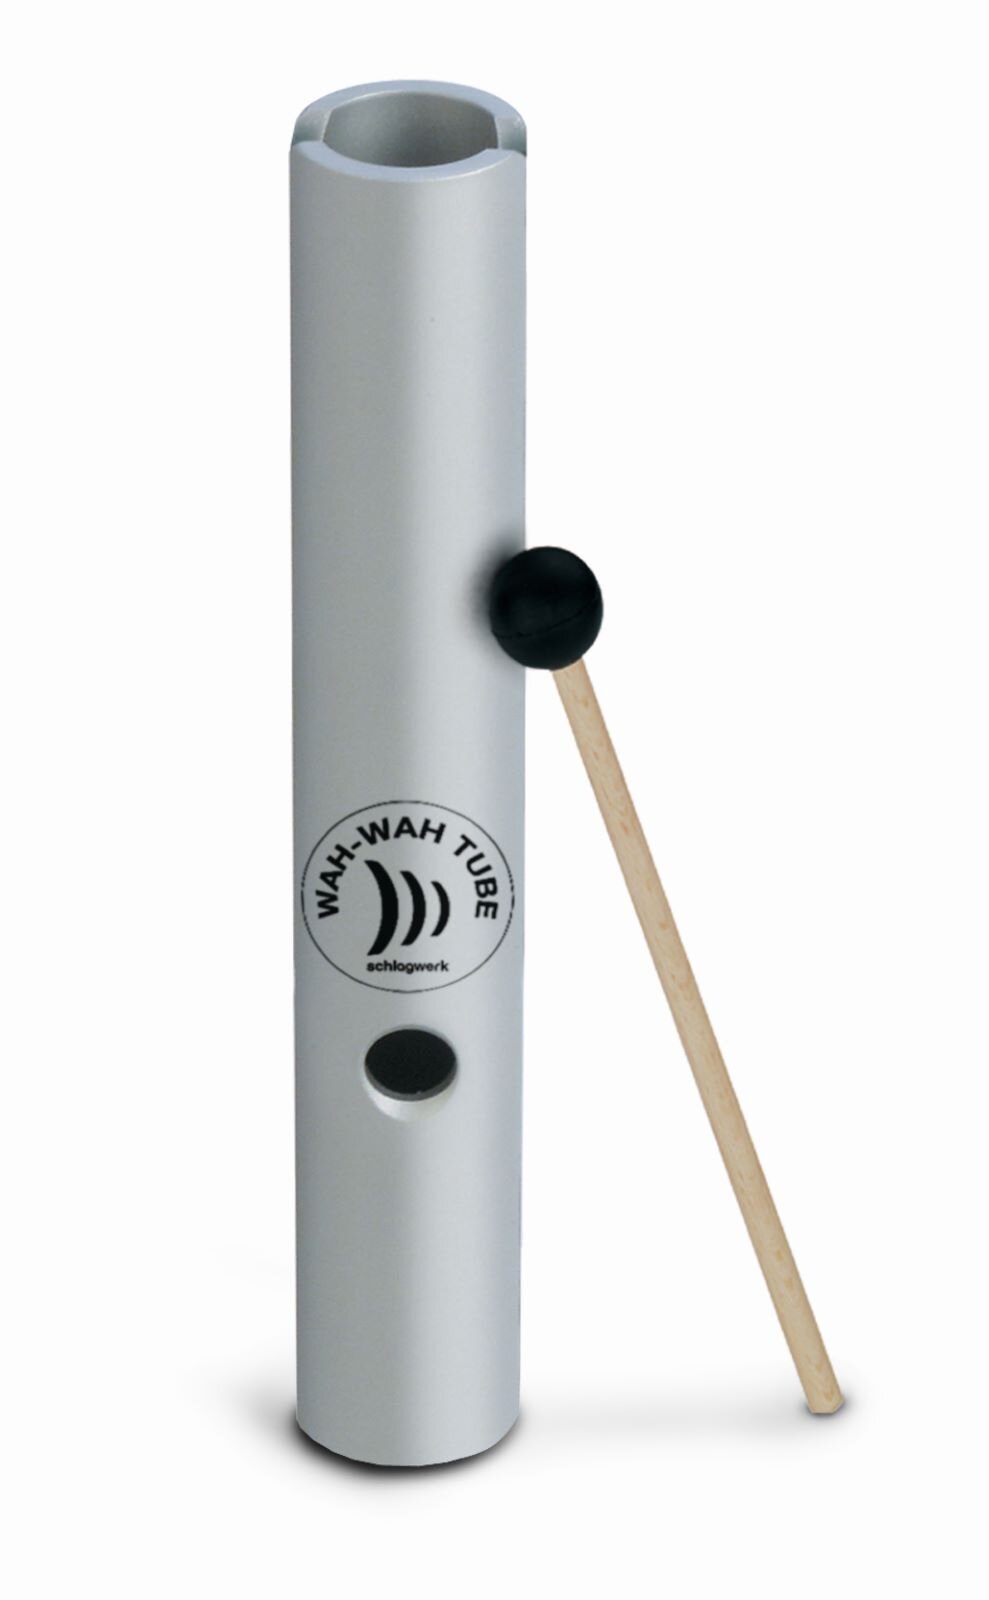 Schlagwerk Percussion Wah-Wah Tube 27 cm avec maillet (WT270) : photo 1